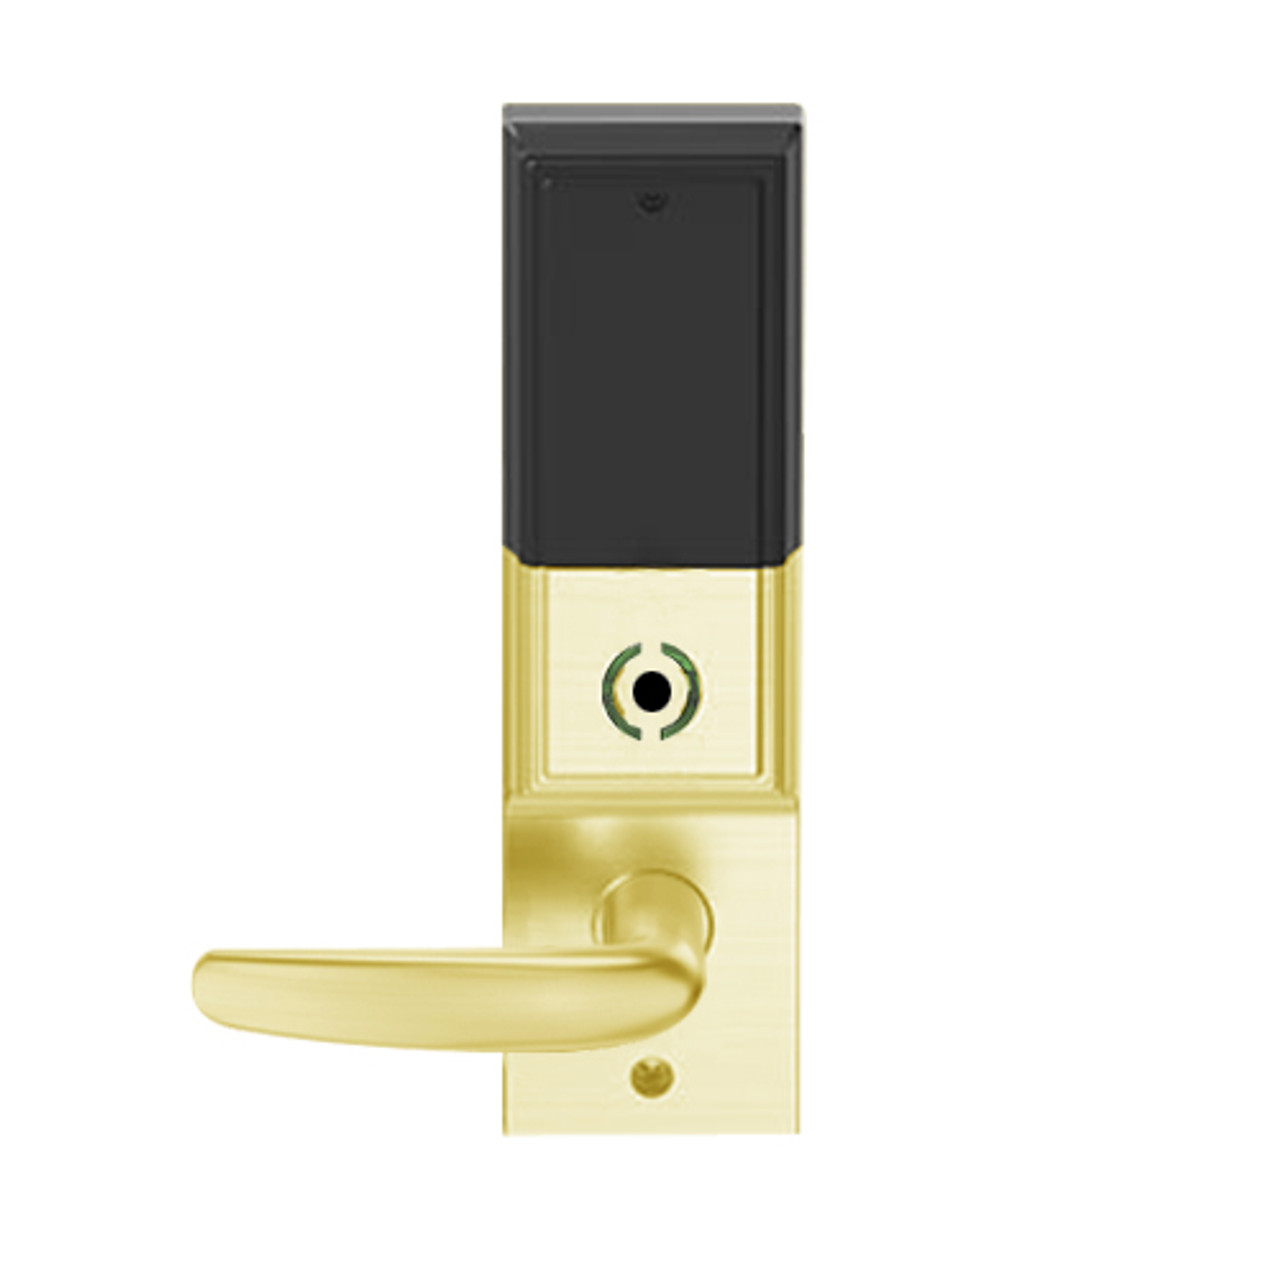 LEMB-ADD-L-07-605 Schlage Less Mortise Cylinder Privacy/Office Wireless Addison Mortise Lock with Push Button, LED and Athens Lever in Bright Brass